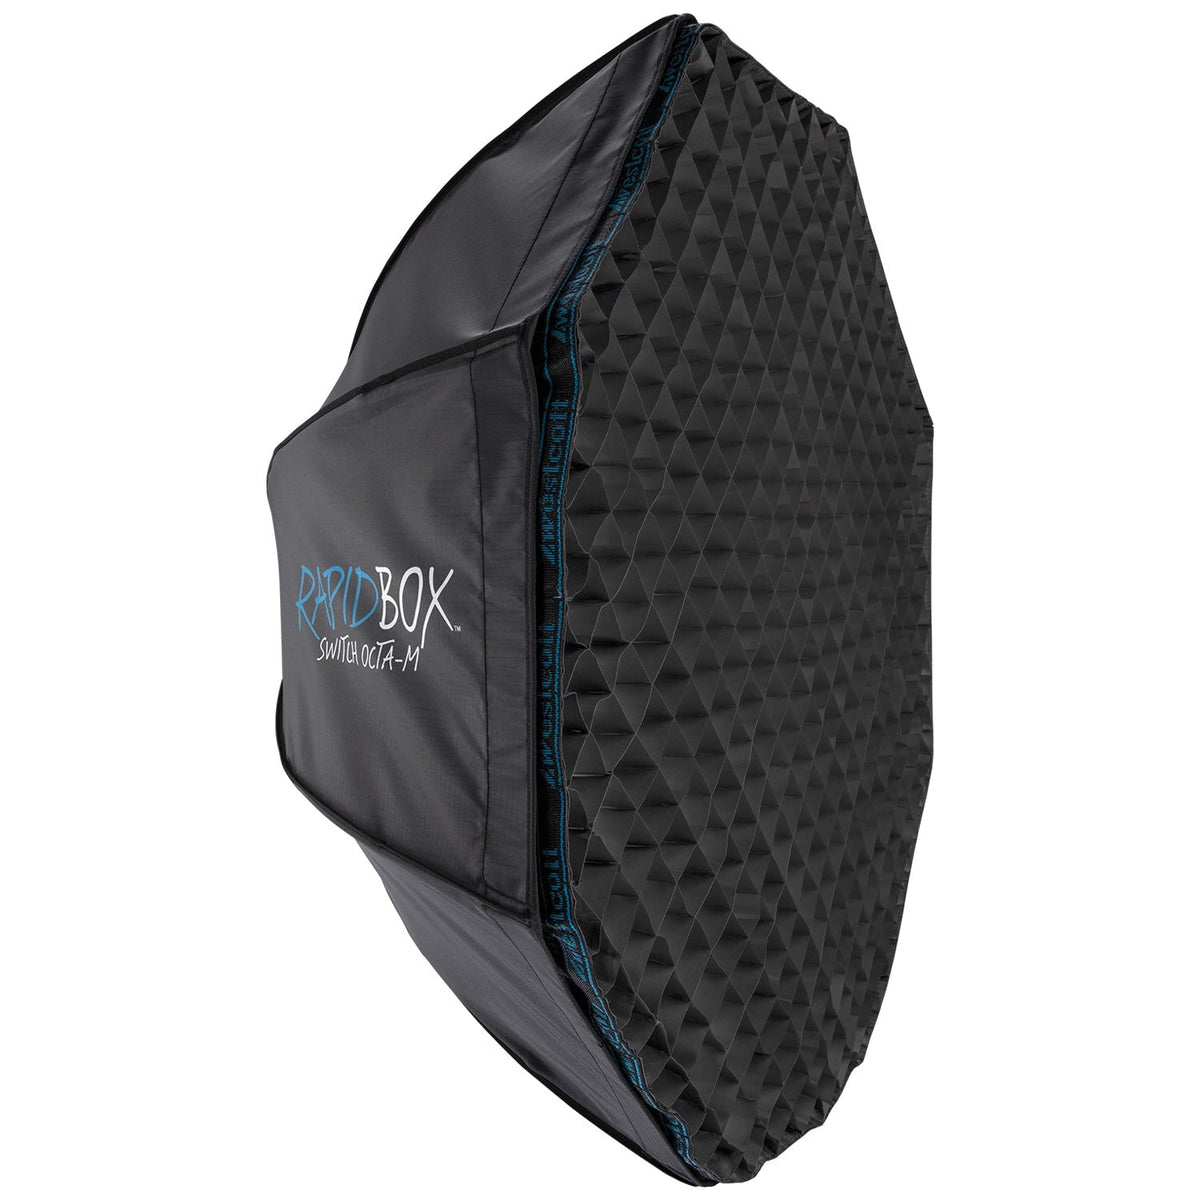 40-Degree Egg Crate Grid for Rapid Box Switch Octa-M and 36" Beauty Dish